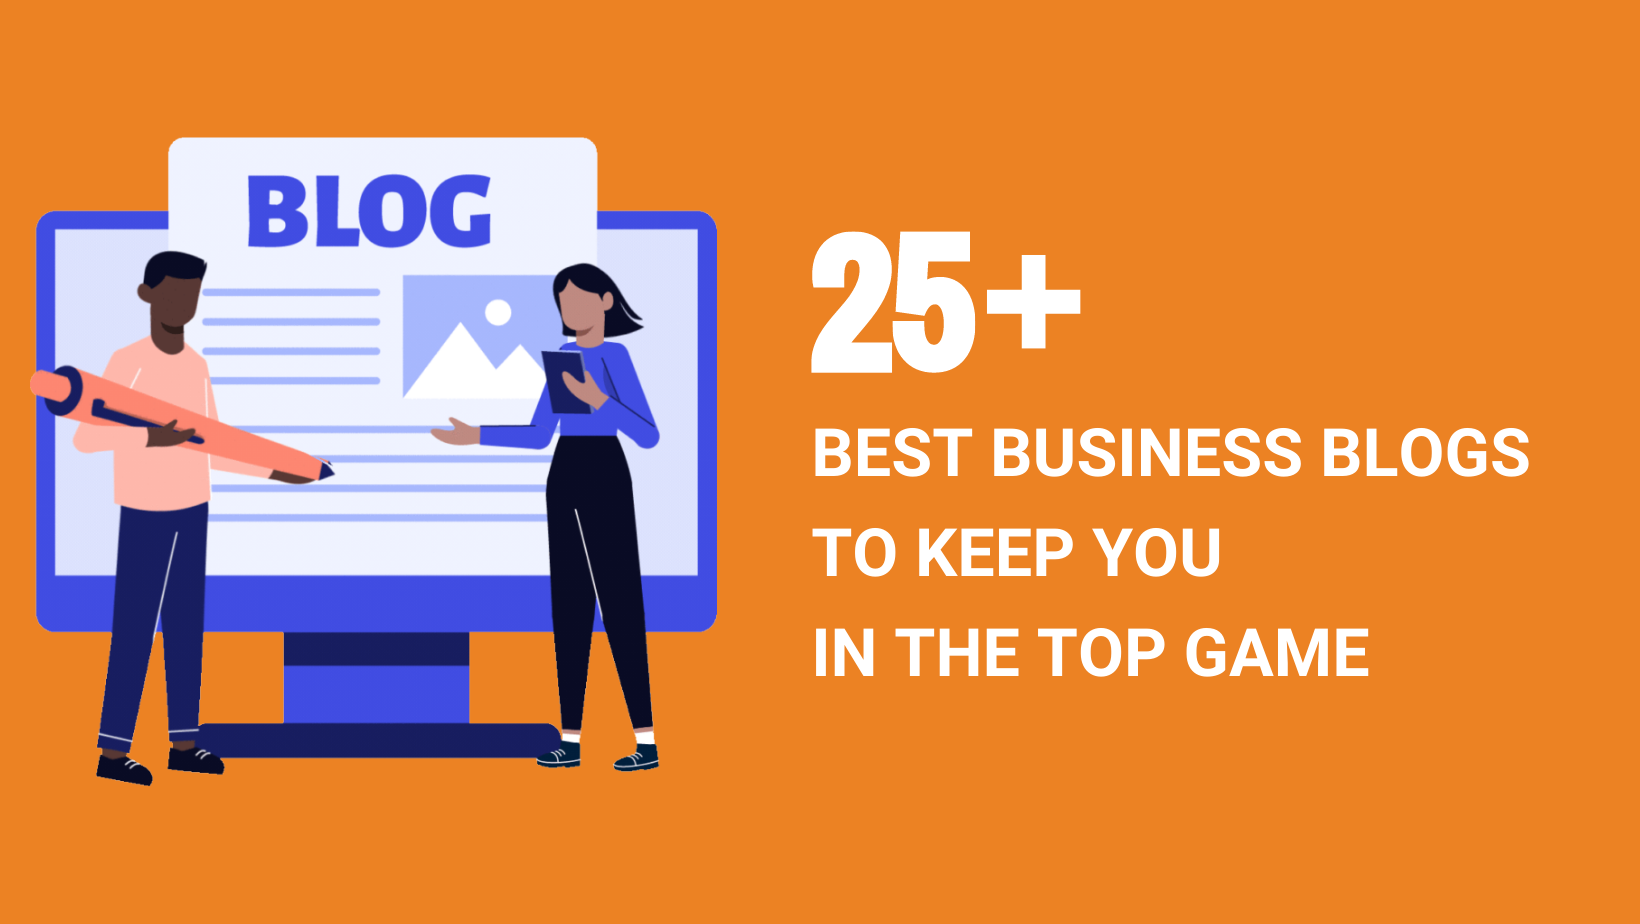 25+ BEST BUSINESS BLOGS TO KEEP YOU IN THE TOP GAME